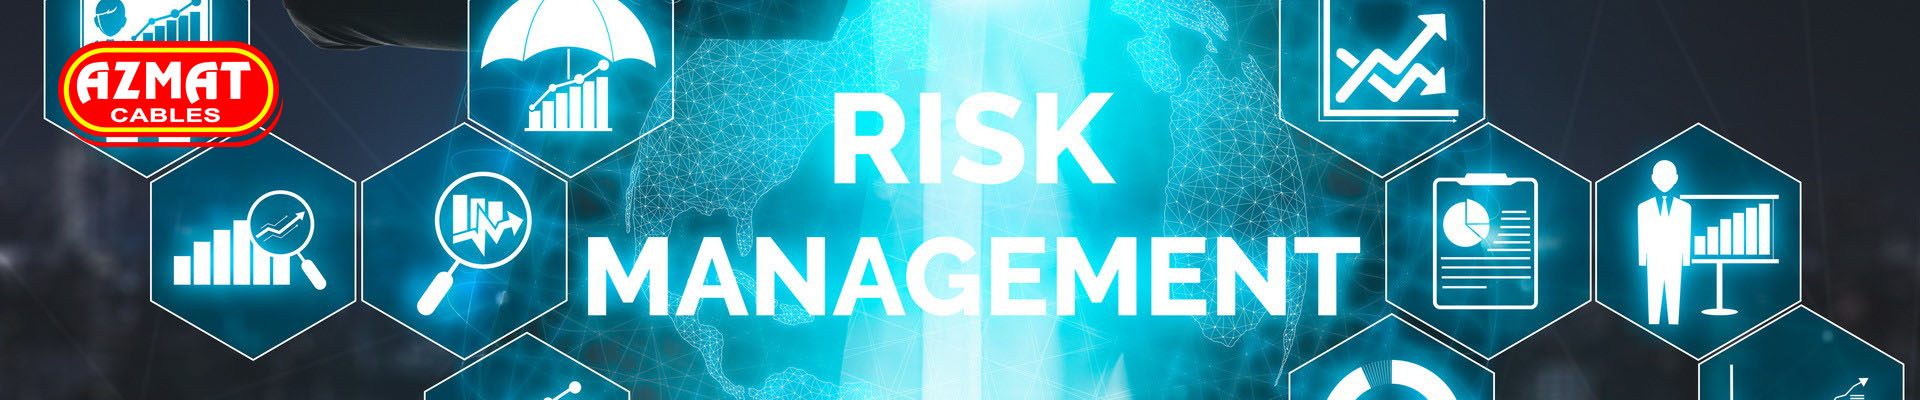 Risk Management and Assessment for Business